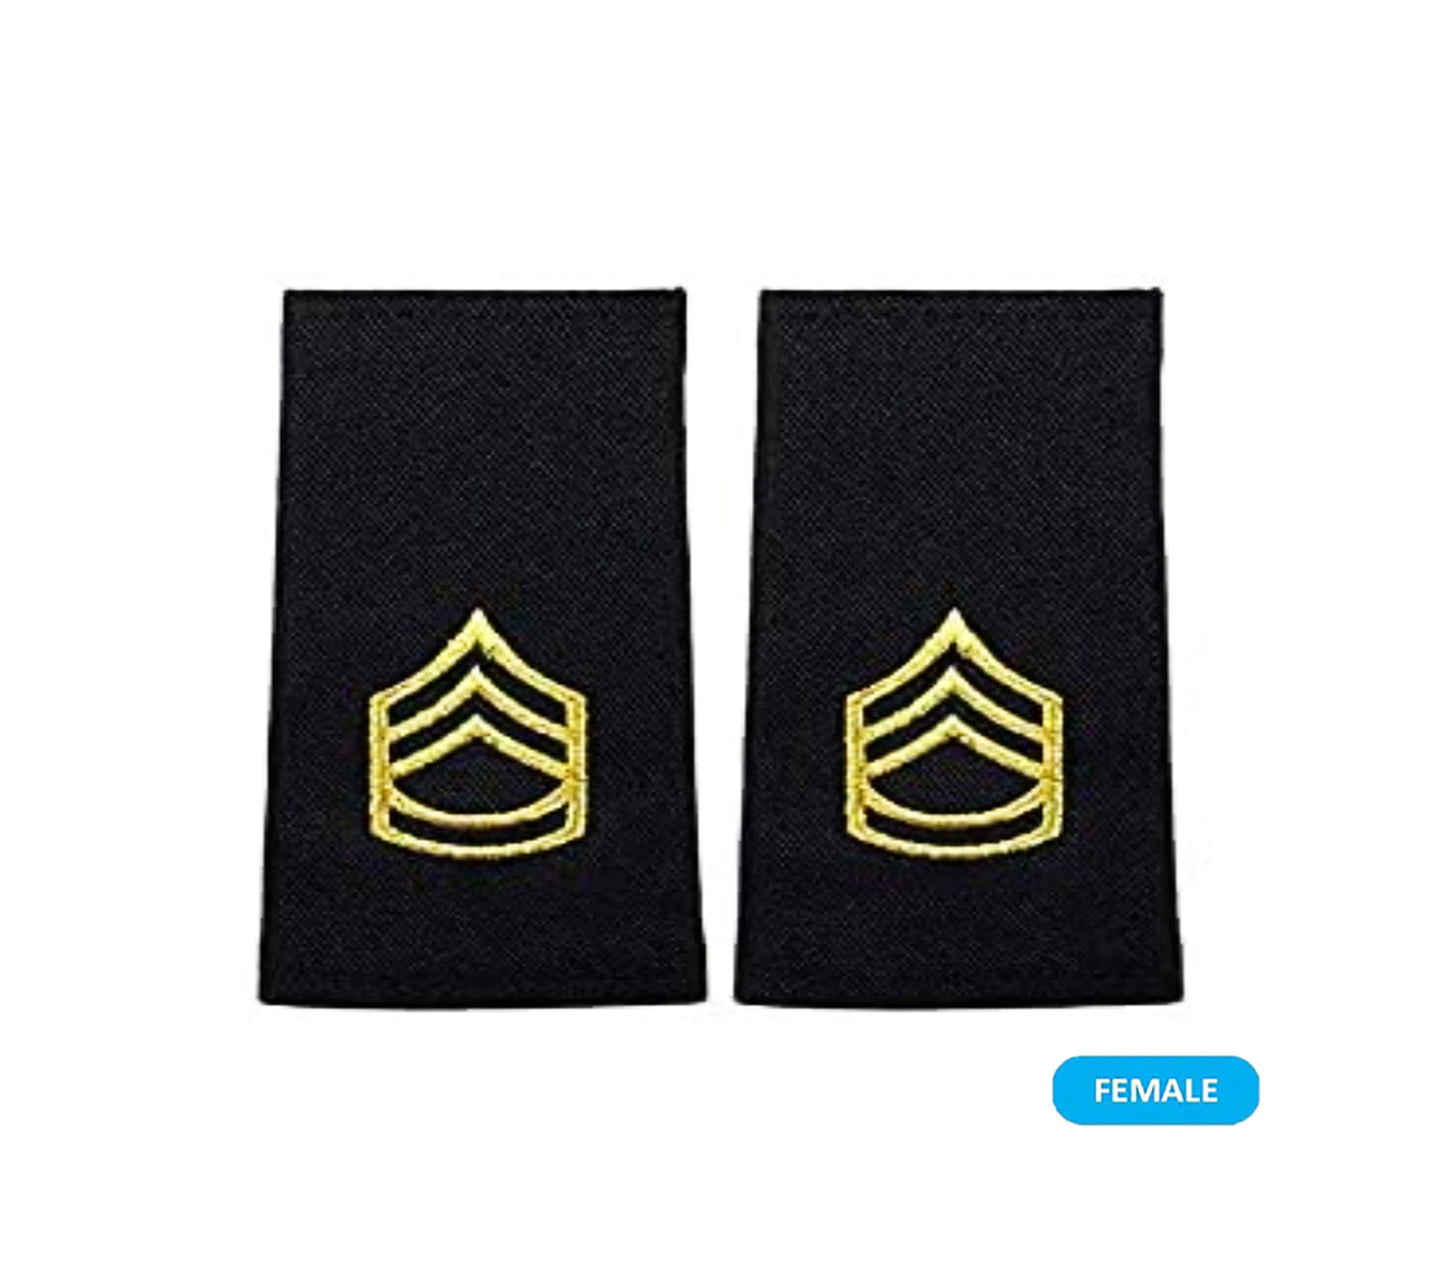 US Army E7 Sergeant First Class Shoulder Marks - Small/Female